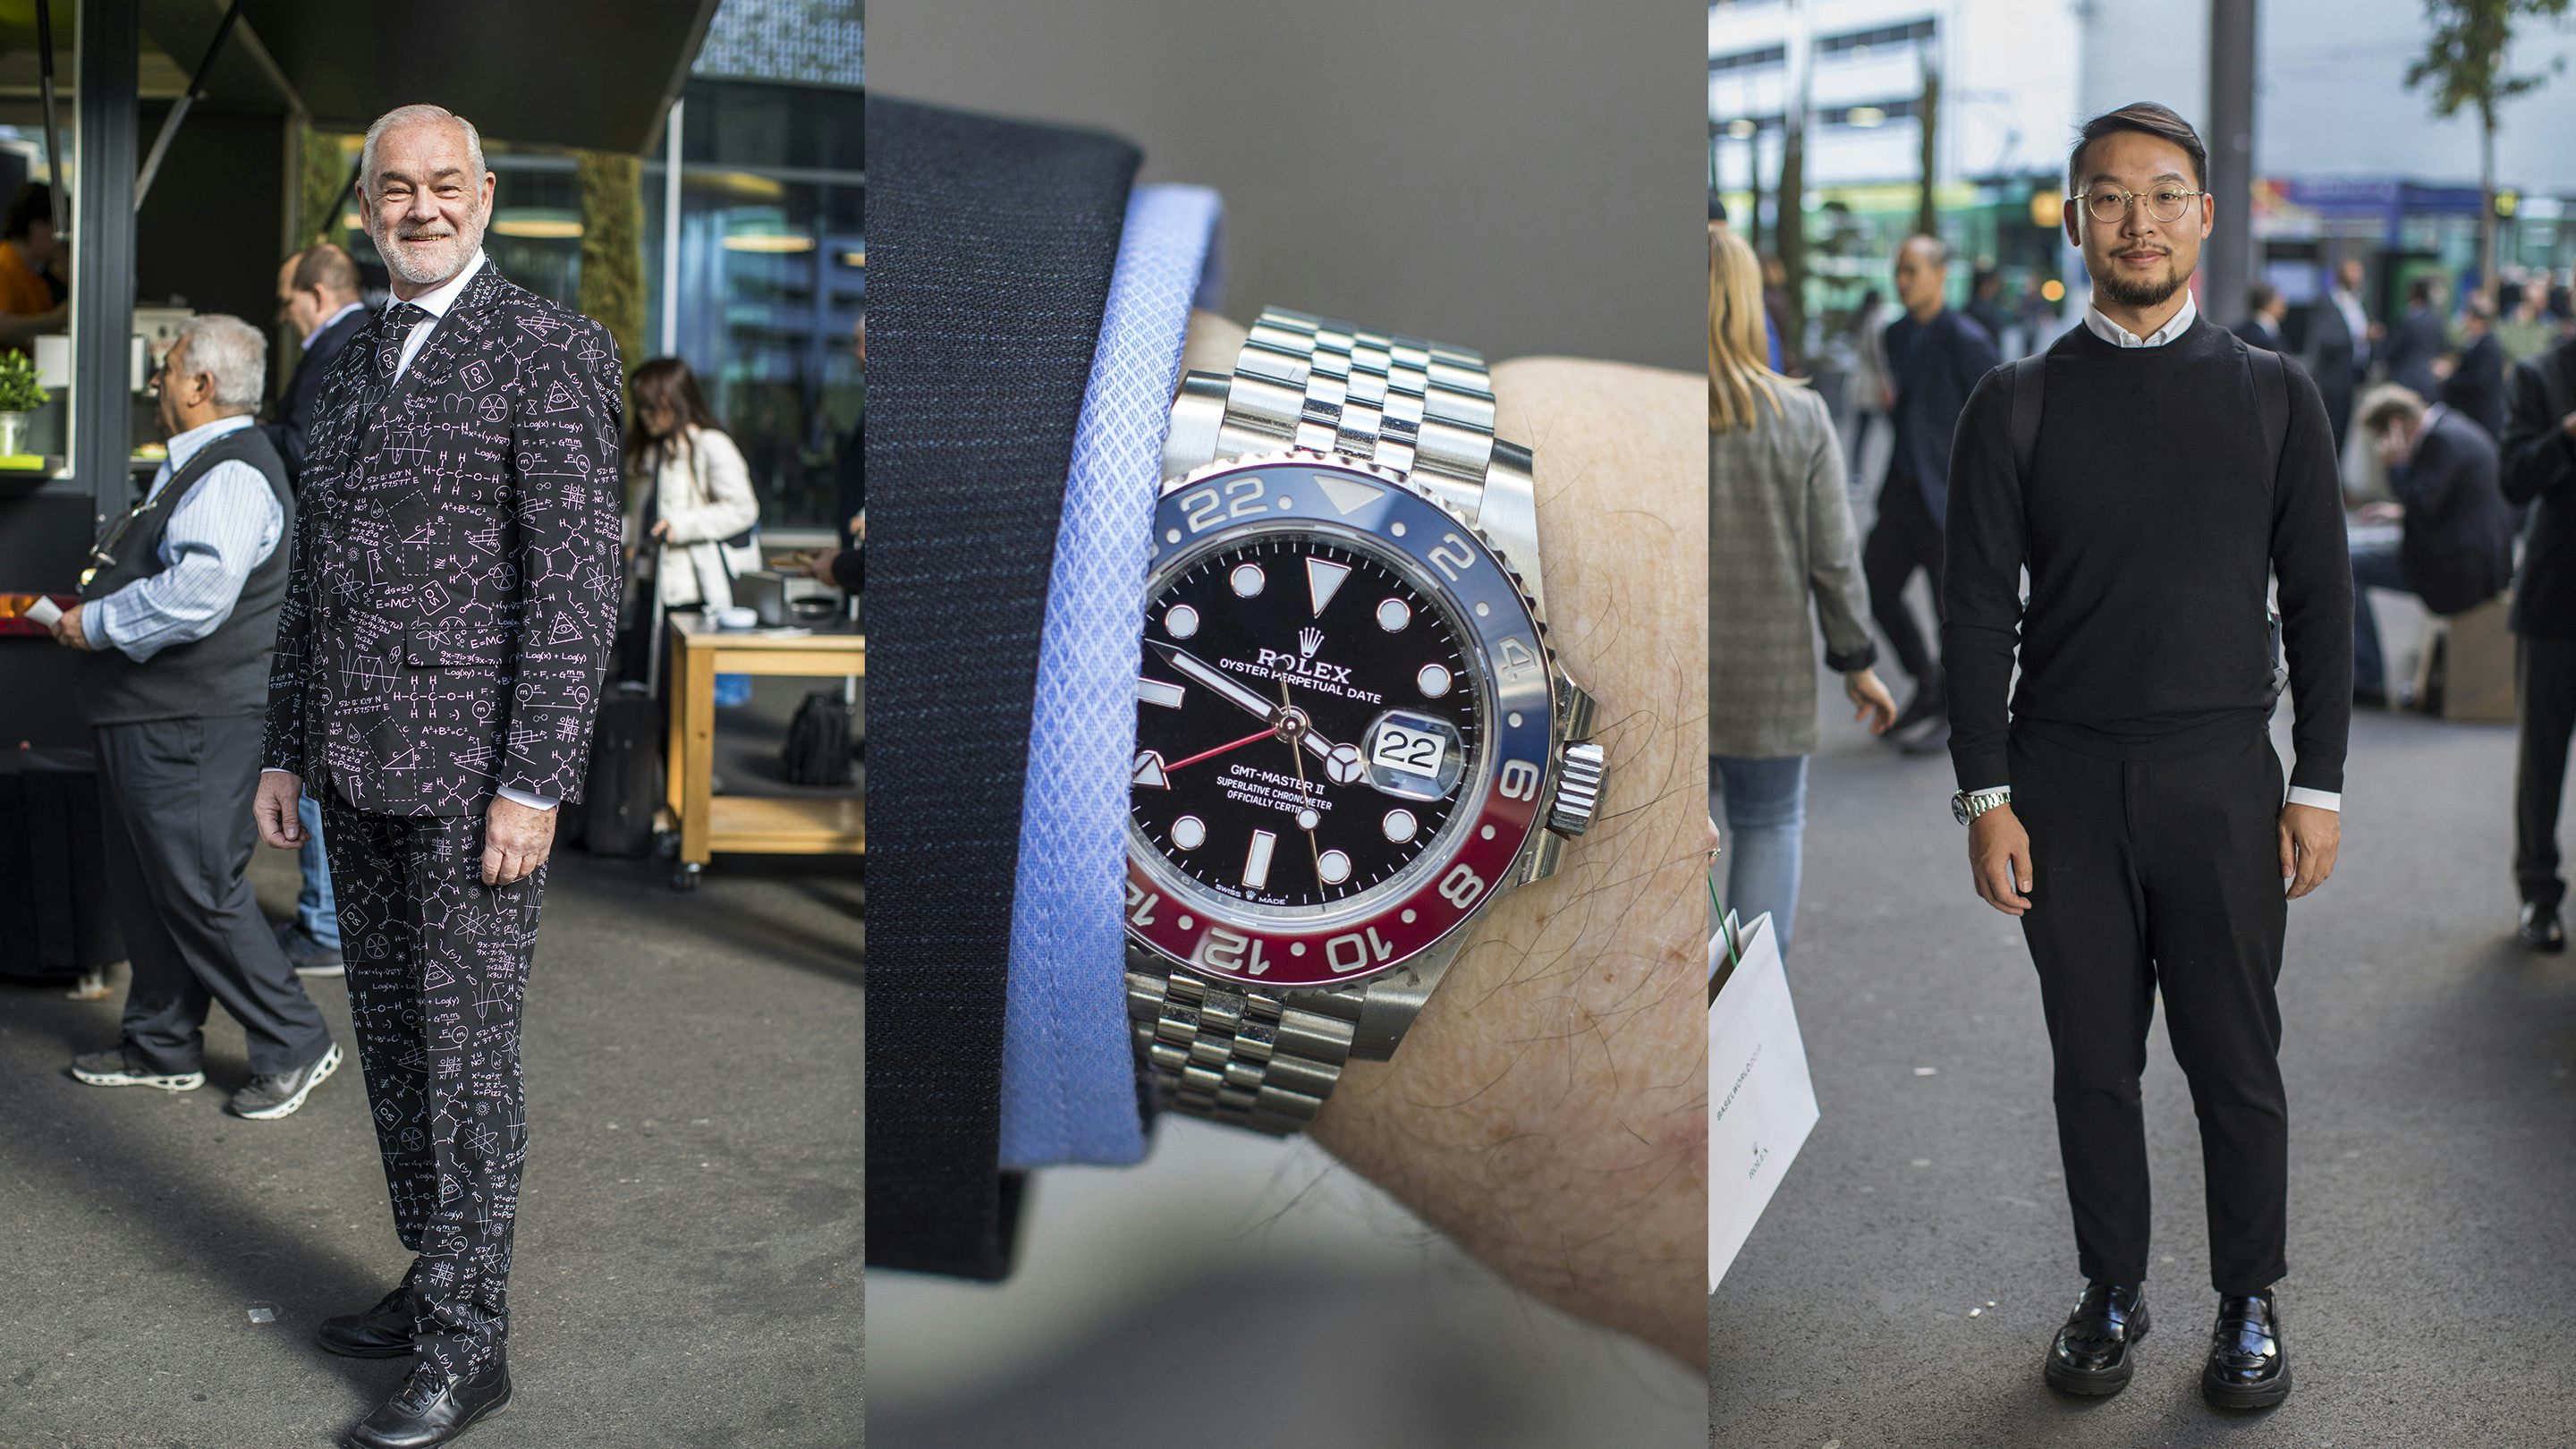 Photo Report: The Fashion And Watches Of Baselworld 2019 - Hodinkee